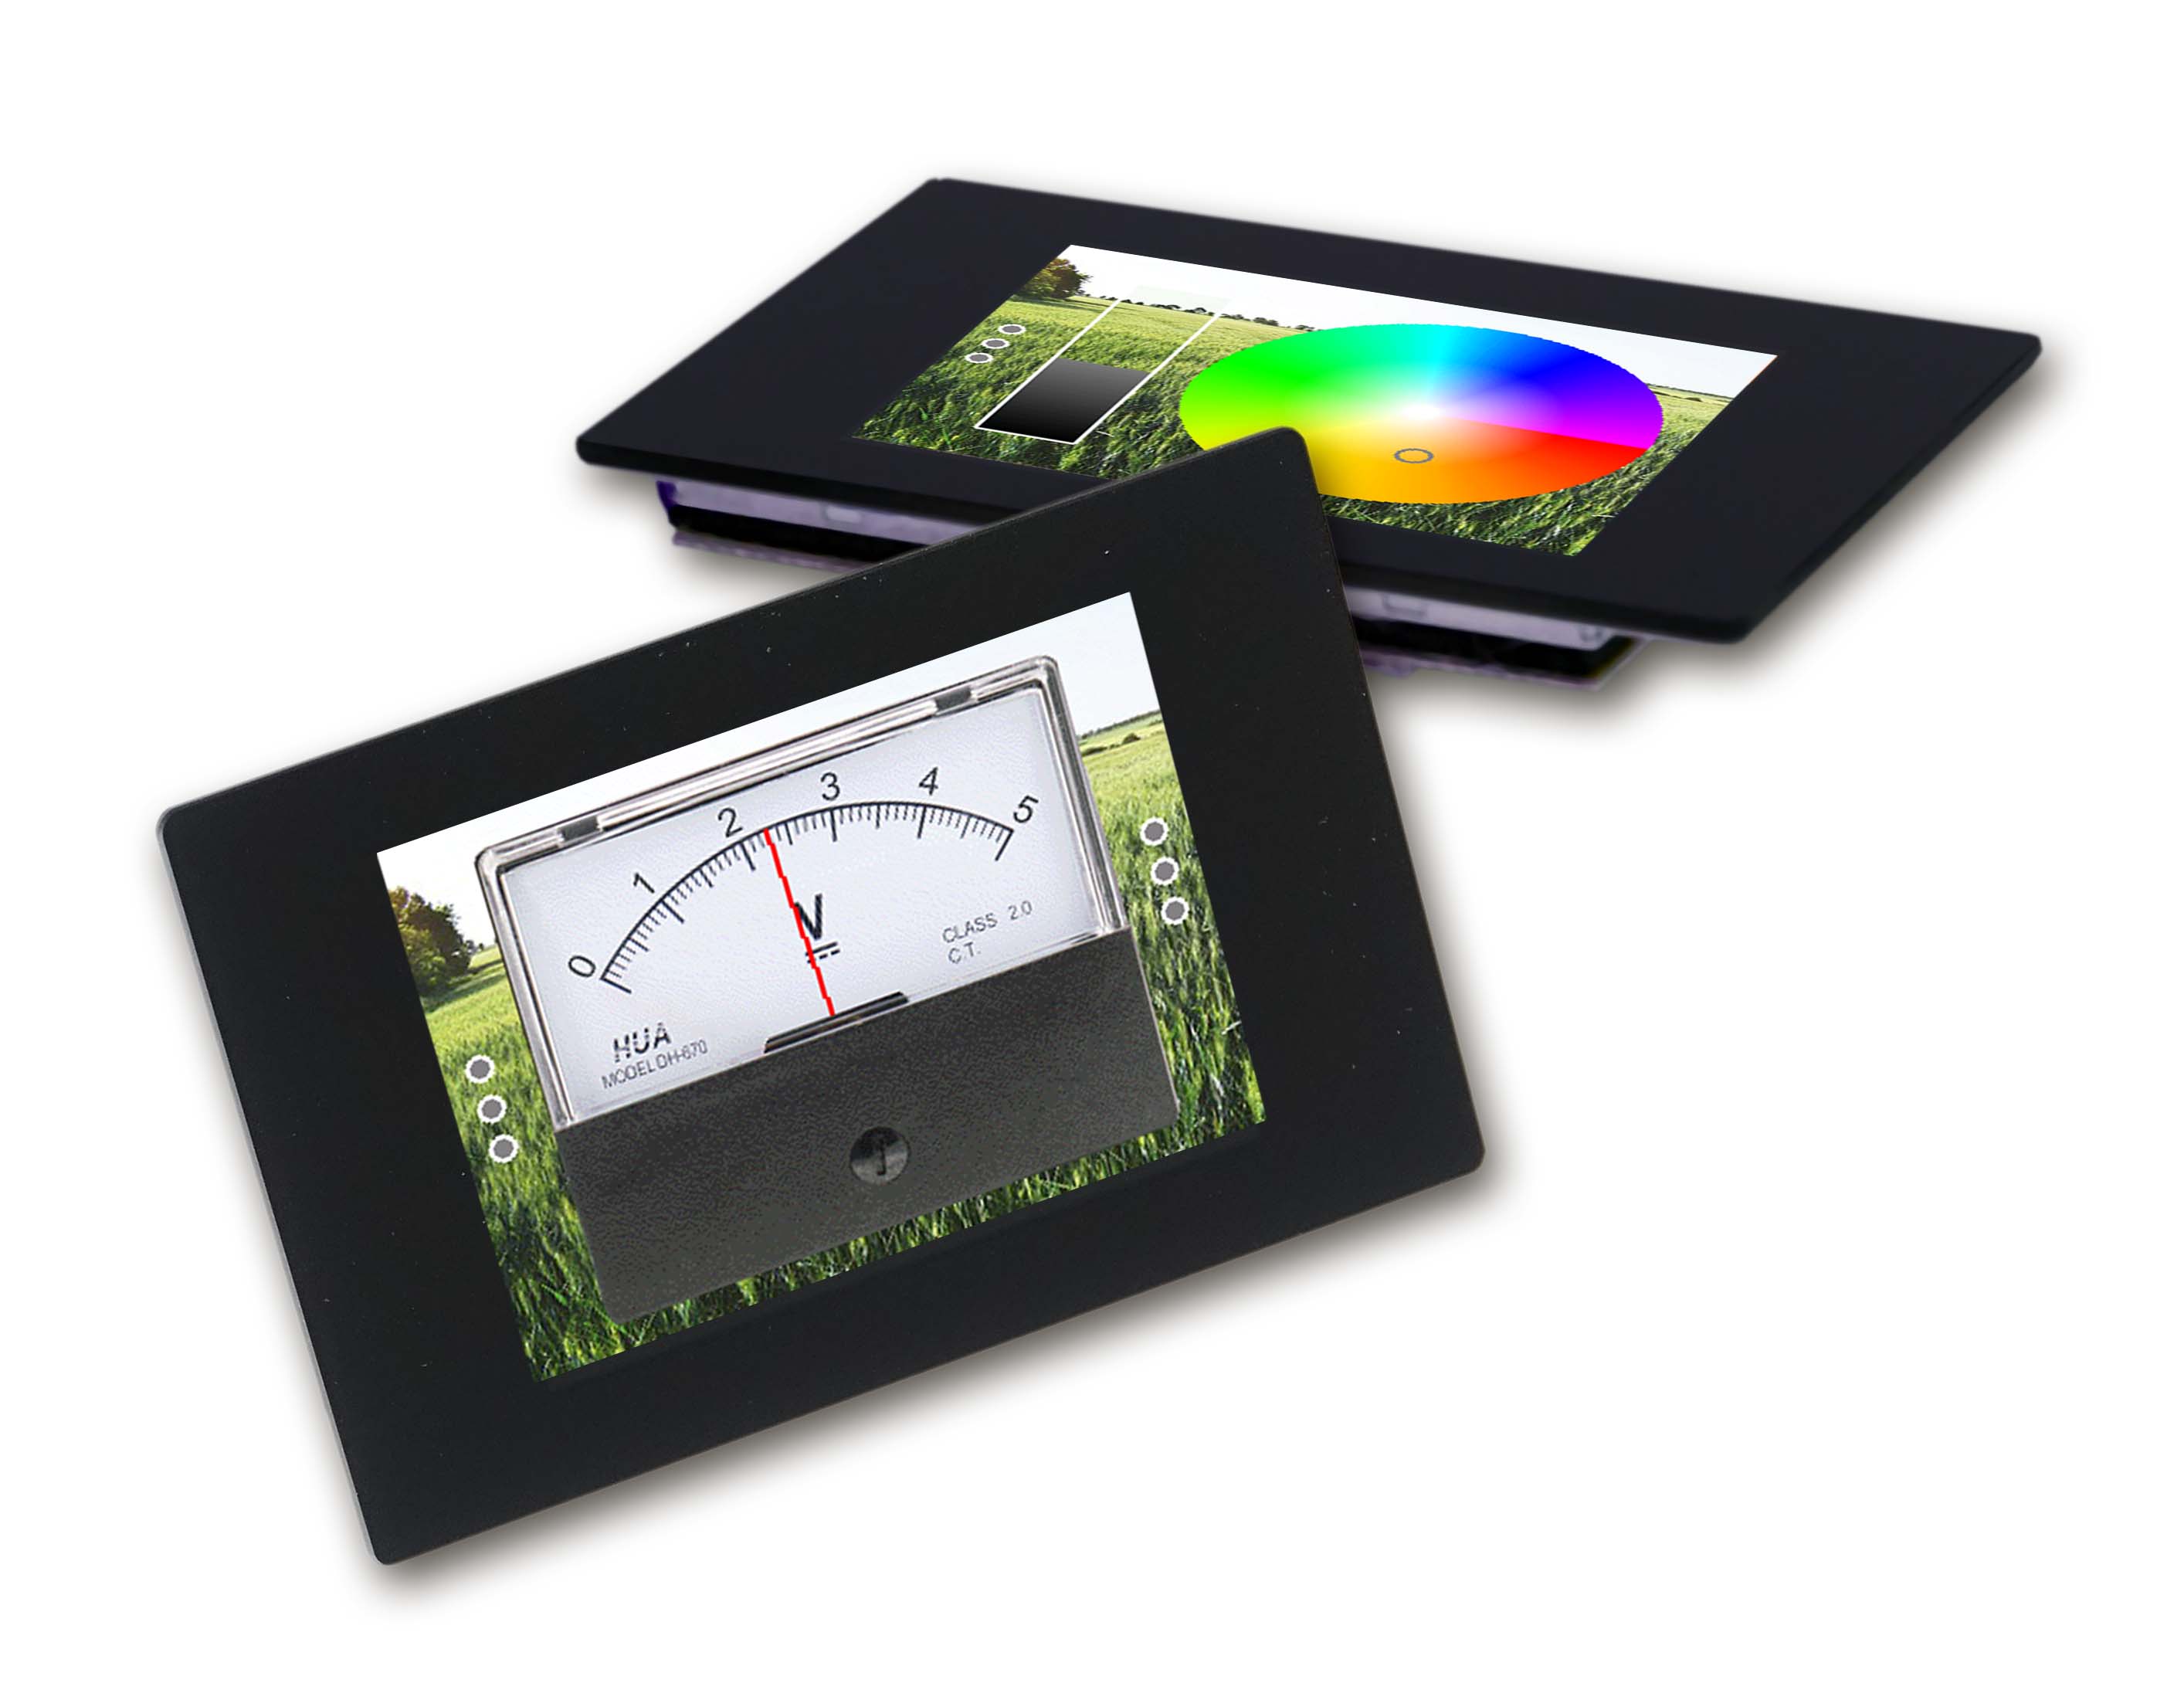 Intelligent displays for home automation for display, control and regulation